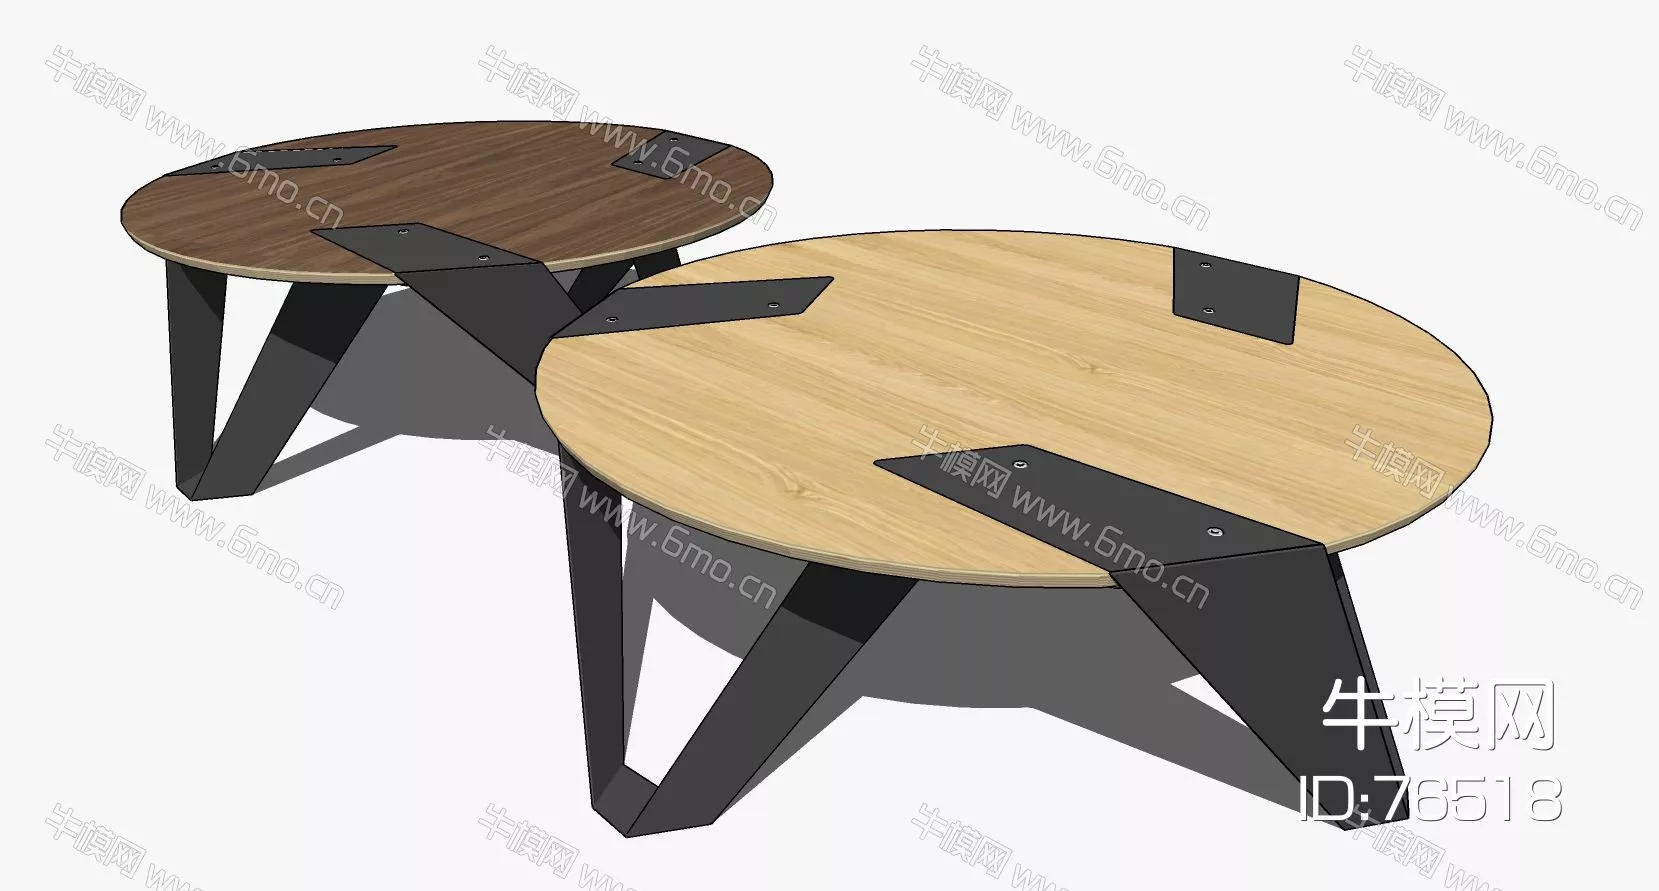 NORDIC COFFEE TABLE - SKETCHUP 3D MODEL - ENSCAPE - 76518